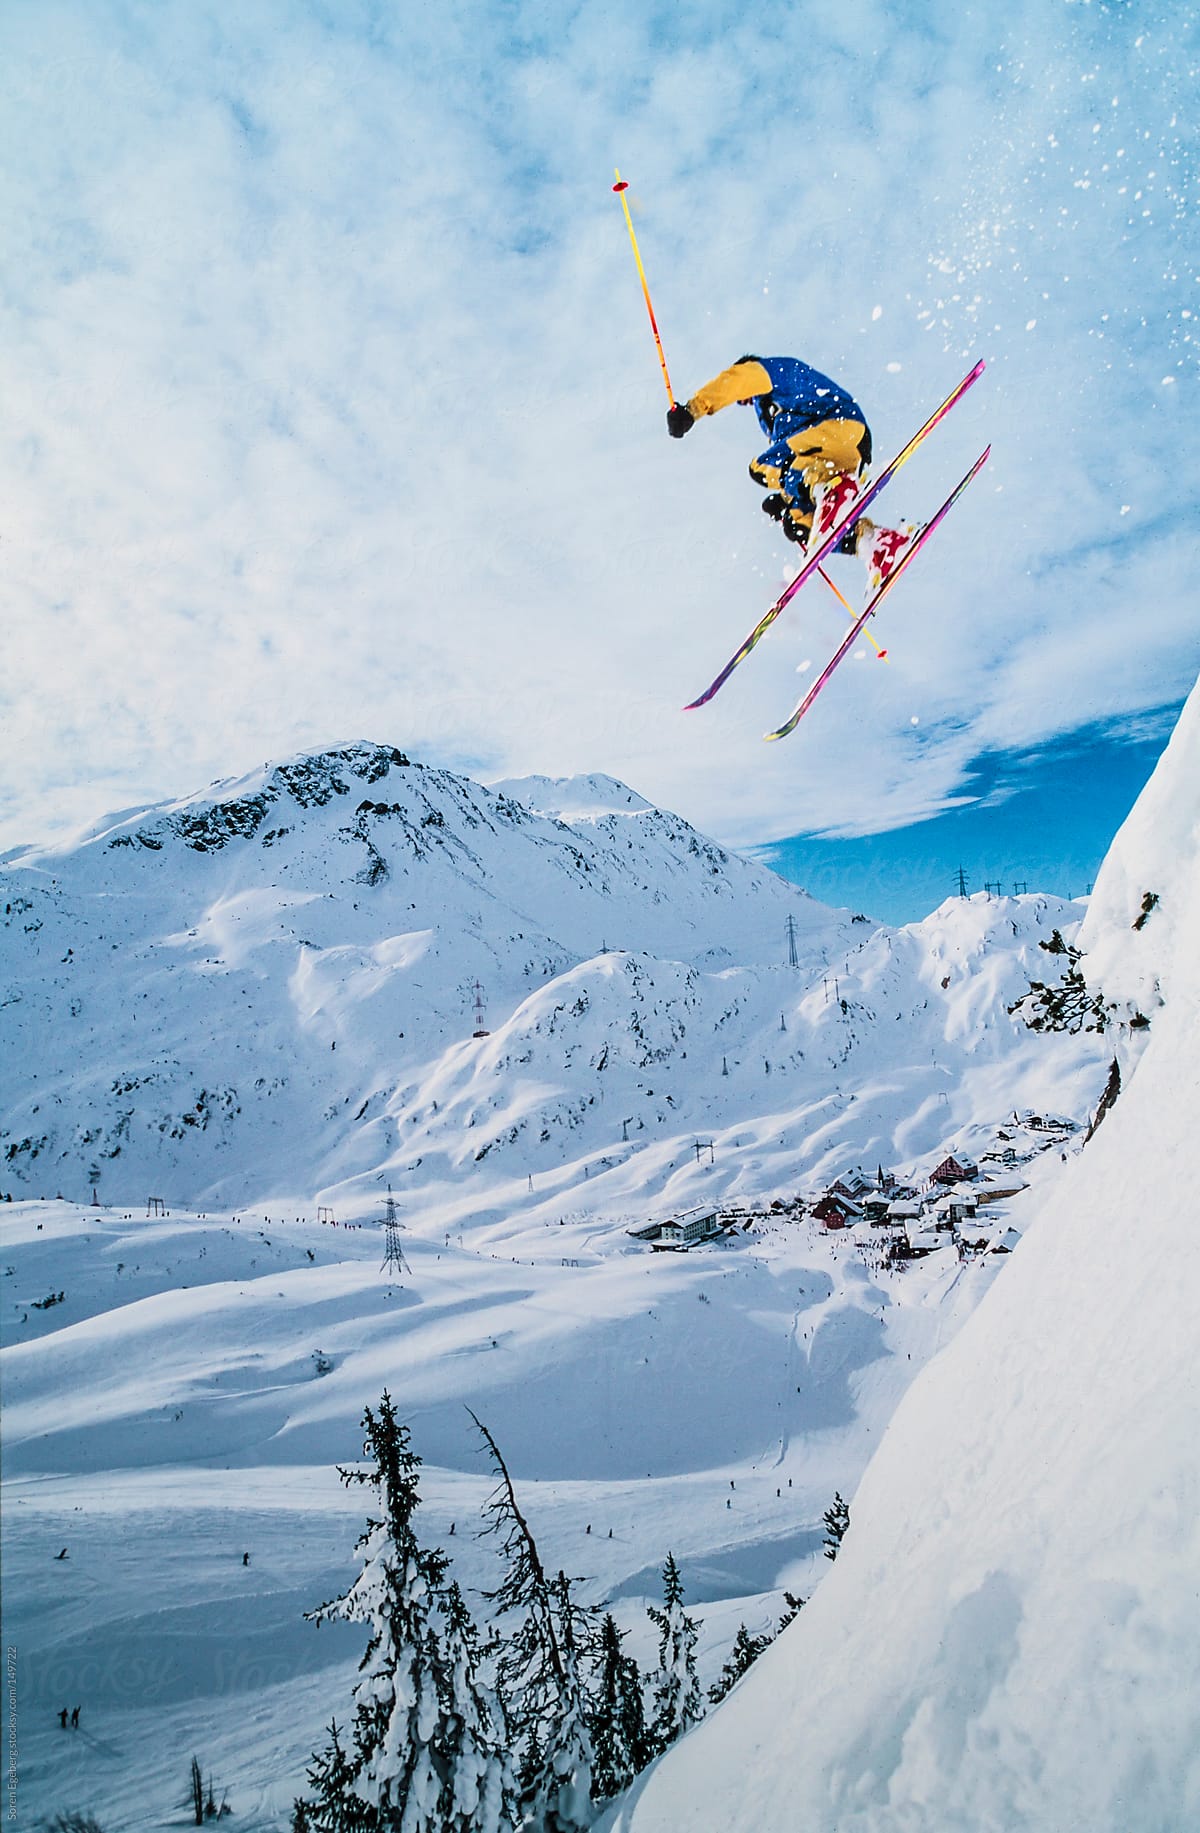 Skier jumping off snow cornice in winter mountain landscape